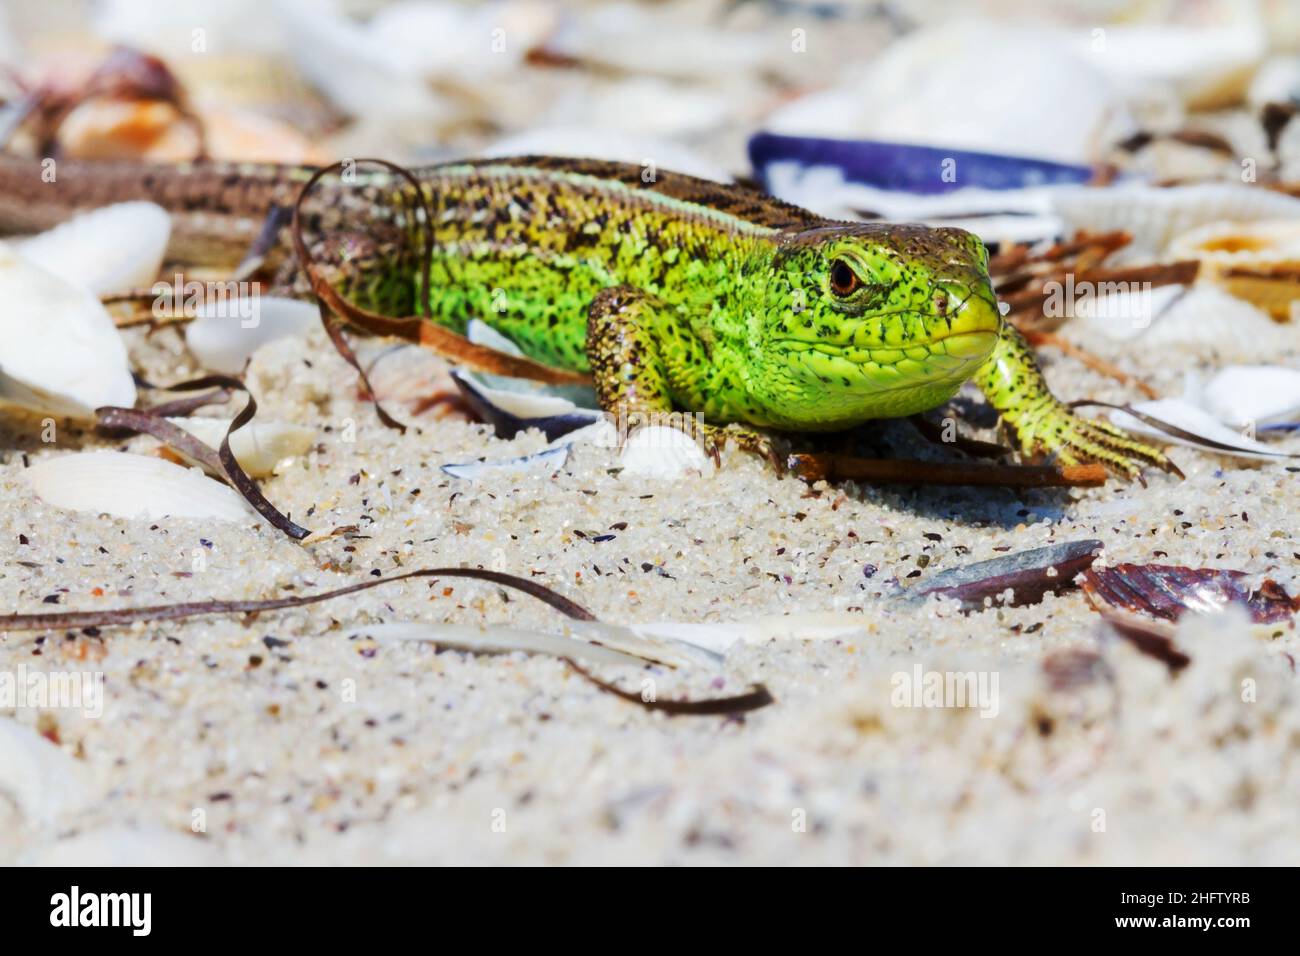 Green Lizard on the sand in focus (Lacerta viridis, Lacerta agilis) is a species of lizard of the genus Green lizards. Stock Photo